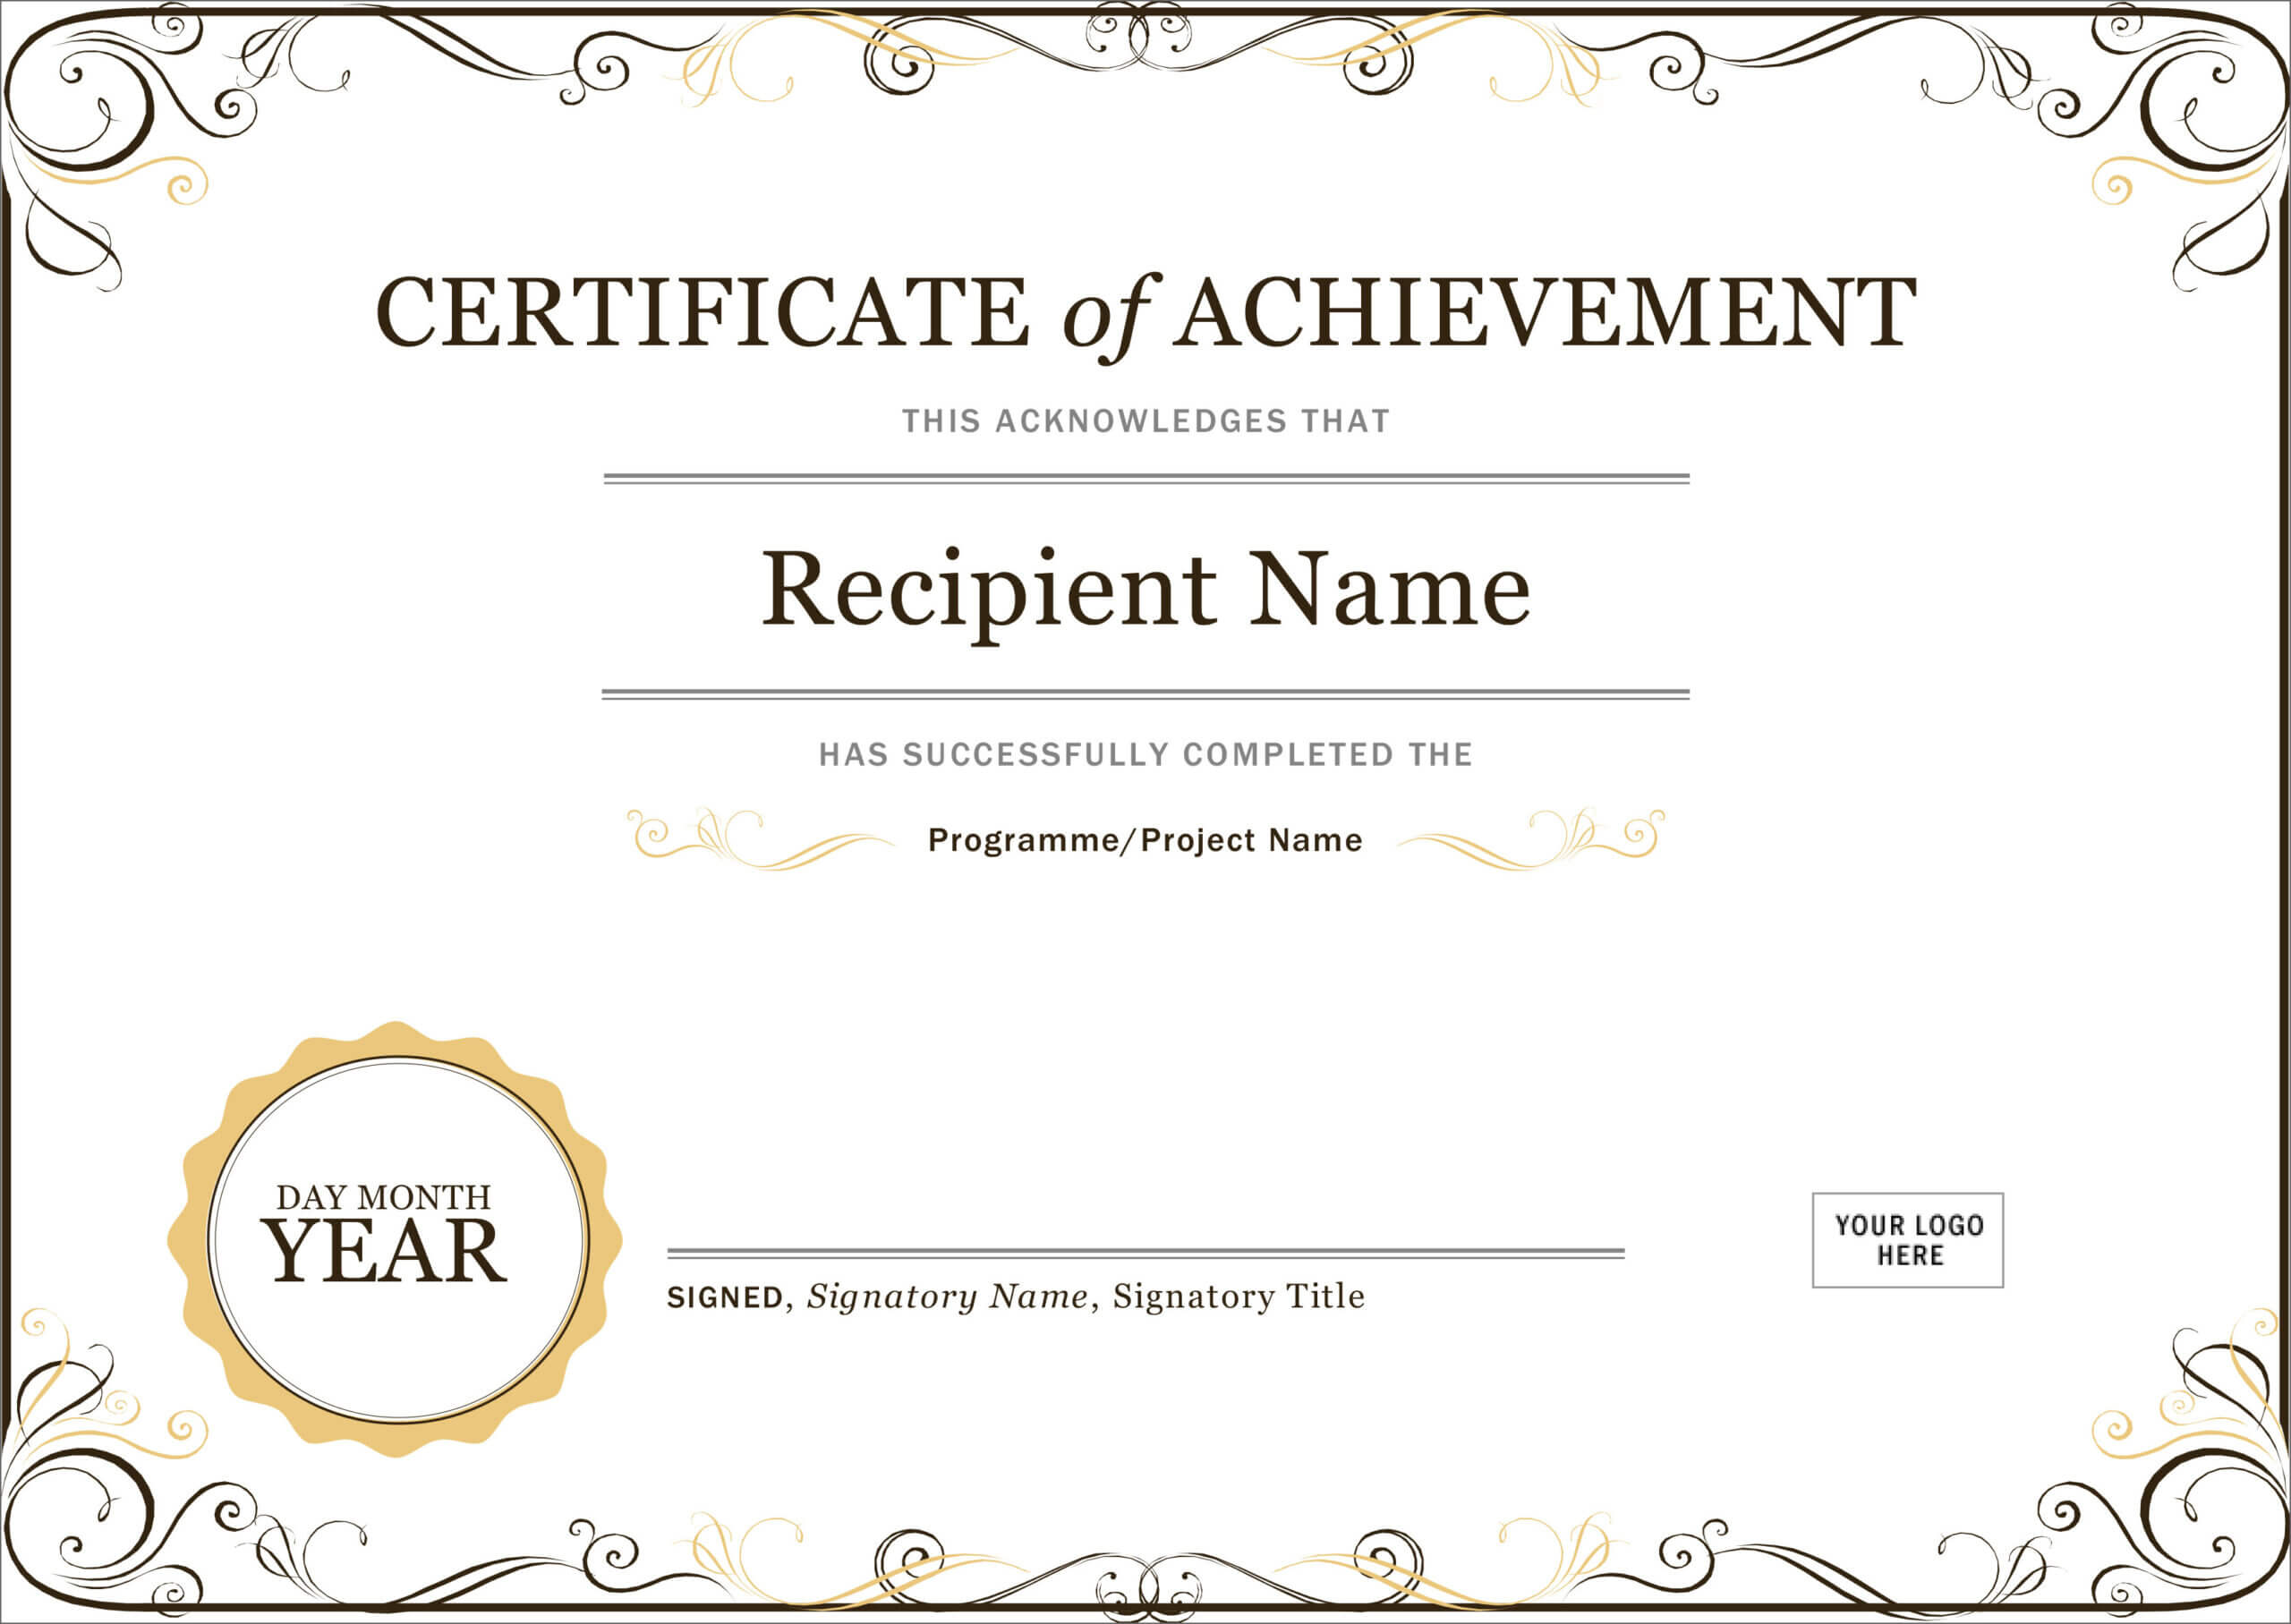 50 Free Creative Blank Certificate Templates In Psd With Player Of The Day Certificate Template